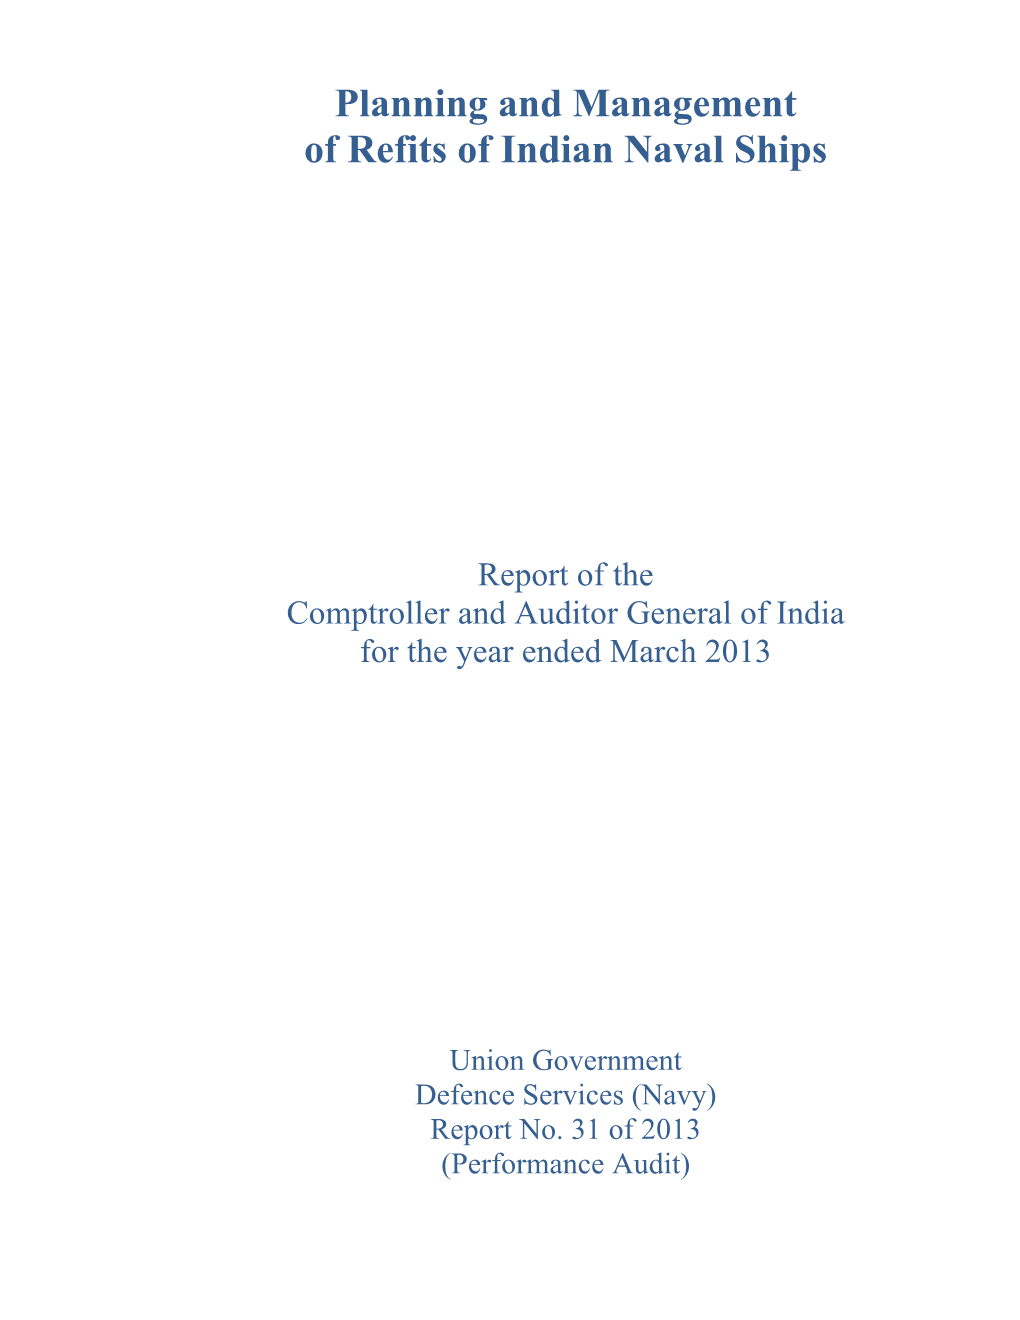 Planning and Management of Refits of Indian Naval Ships